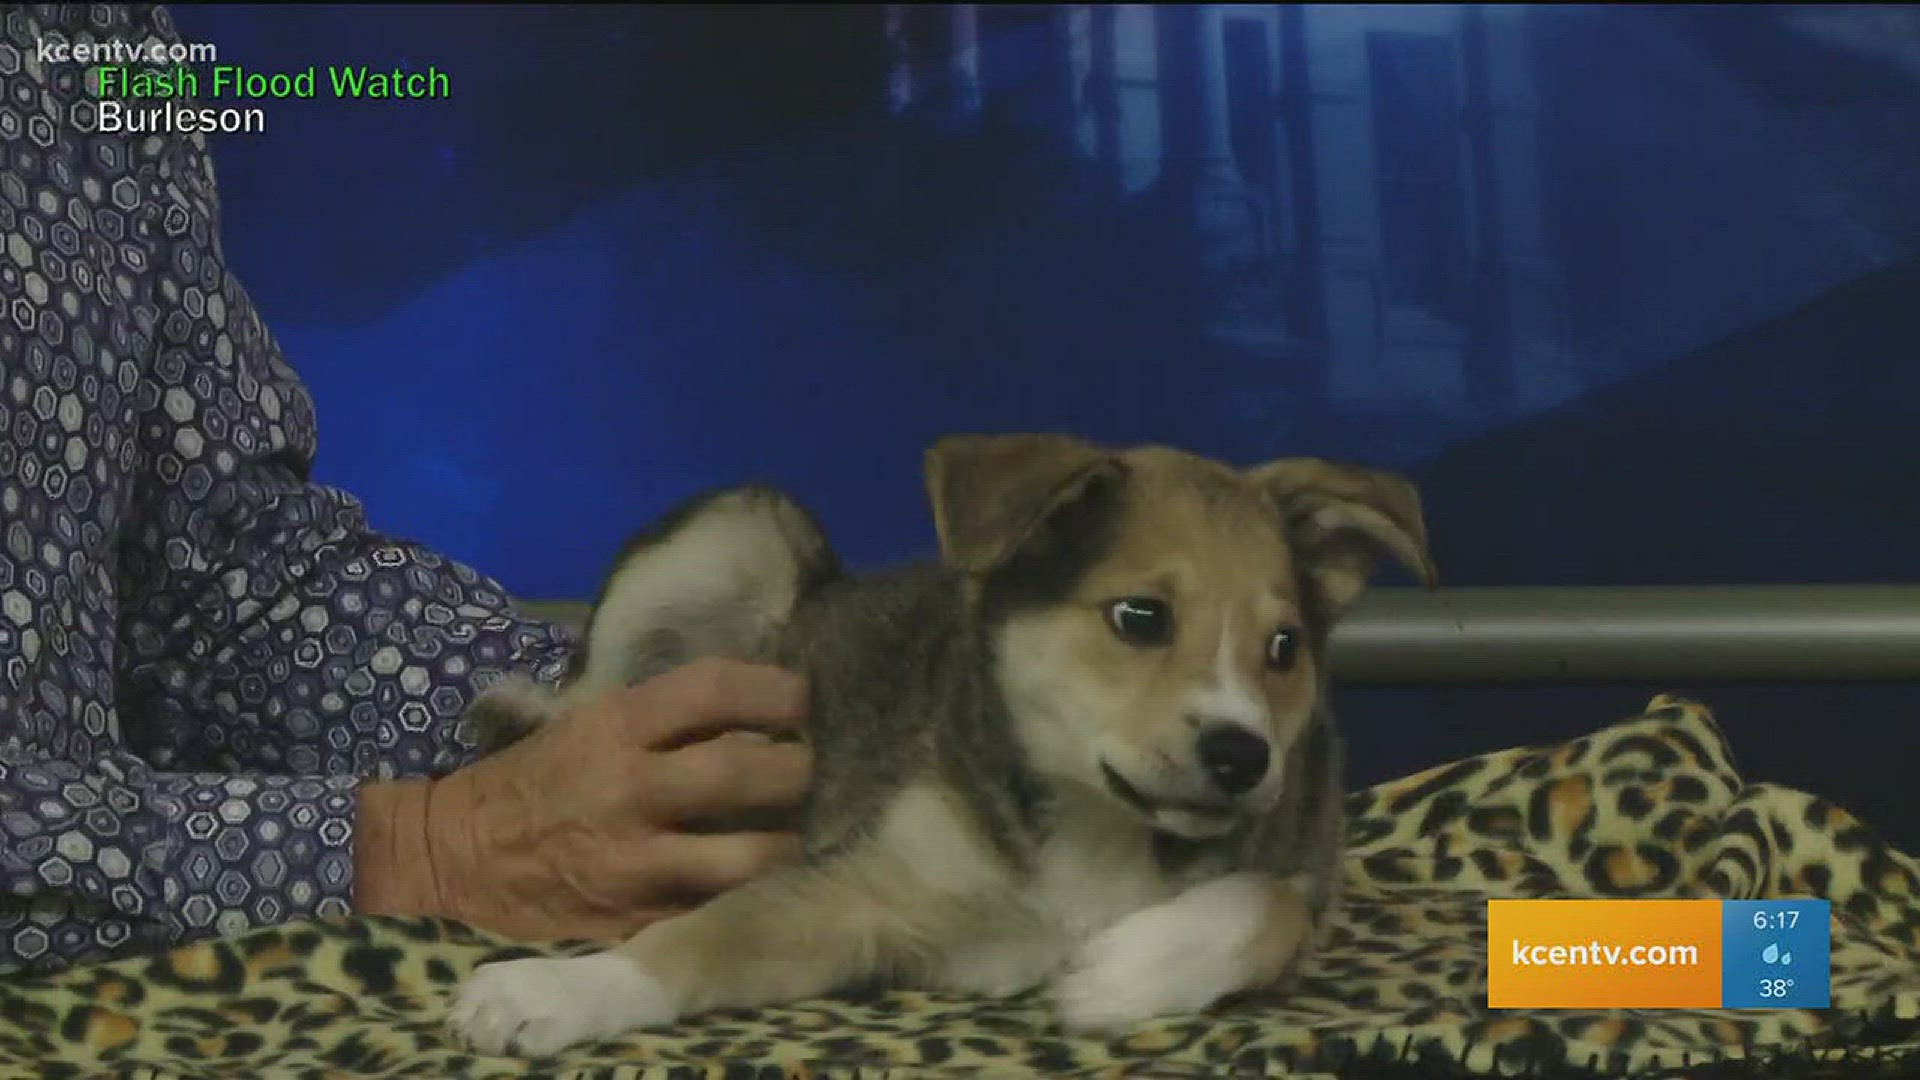 Adopt this pup from the Human Society of Central Texas.